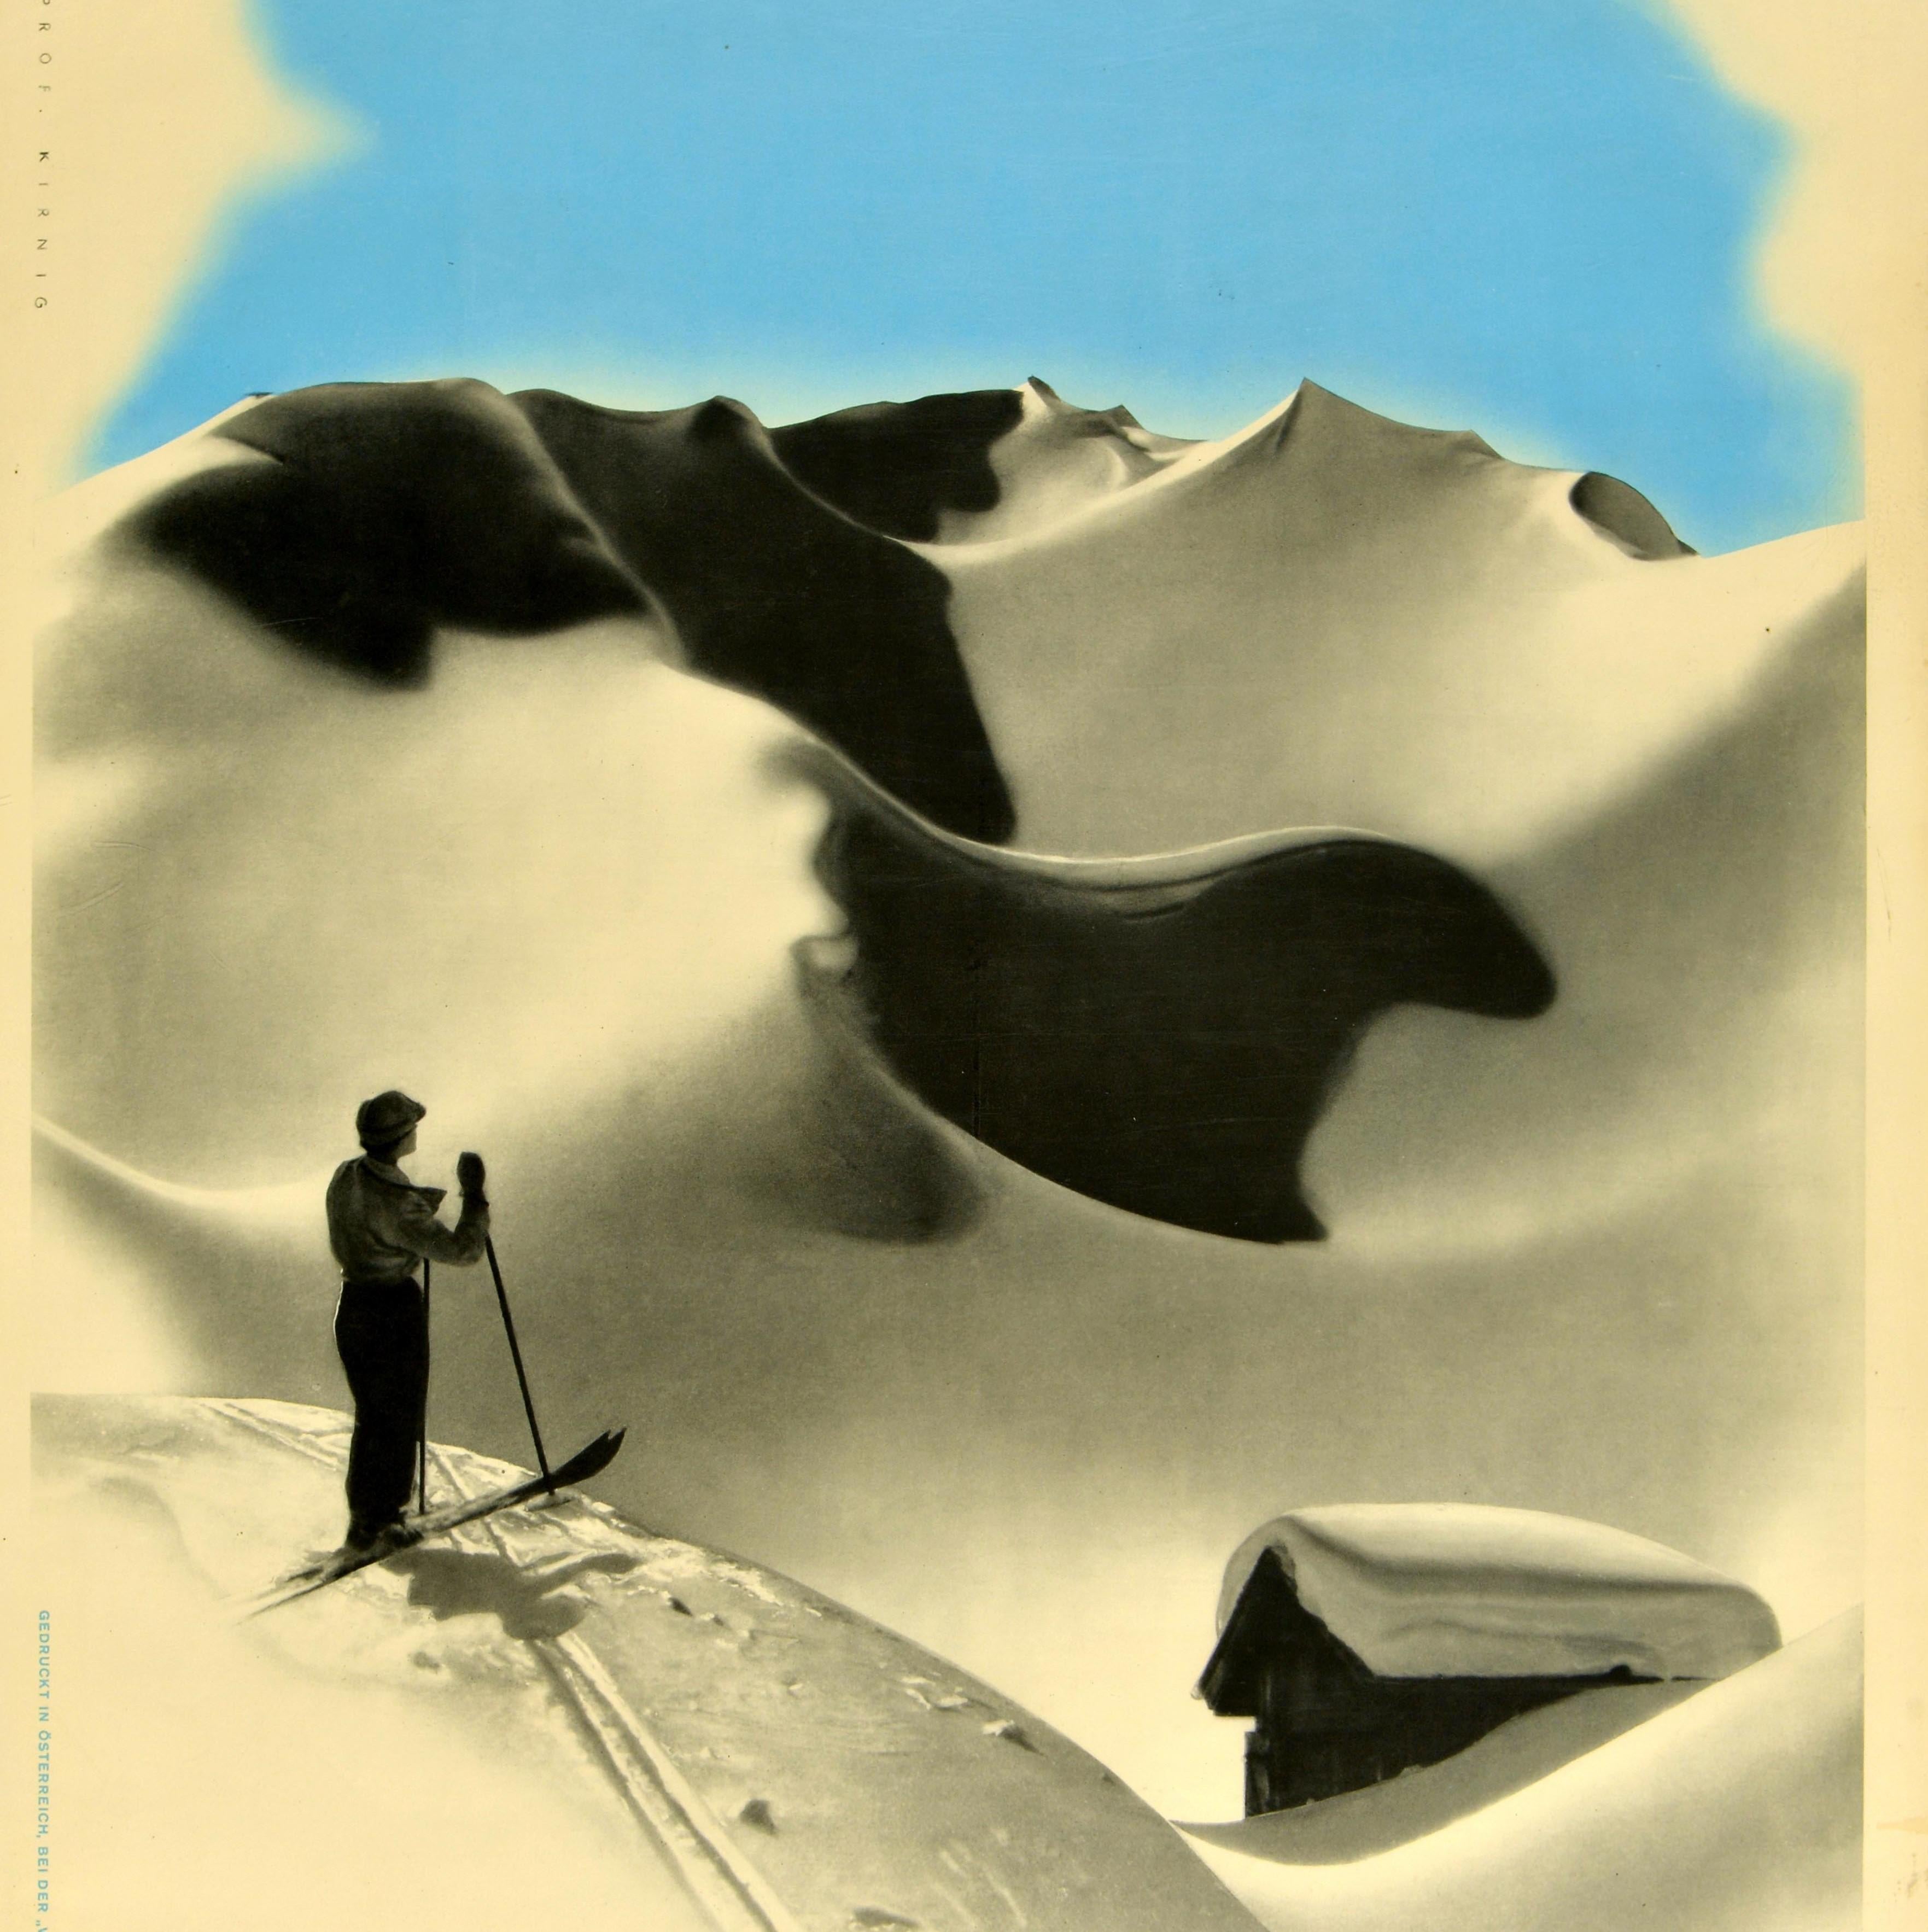 Original vintage winter sport skiing poster for Austria featuring a scenic view in black and white by Atelier Prof. Kirnig (Paul Kirnig; 1891-1955. This is a blank poster before the text was printed, the image features a skier standing on skis at